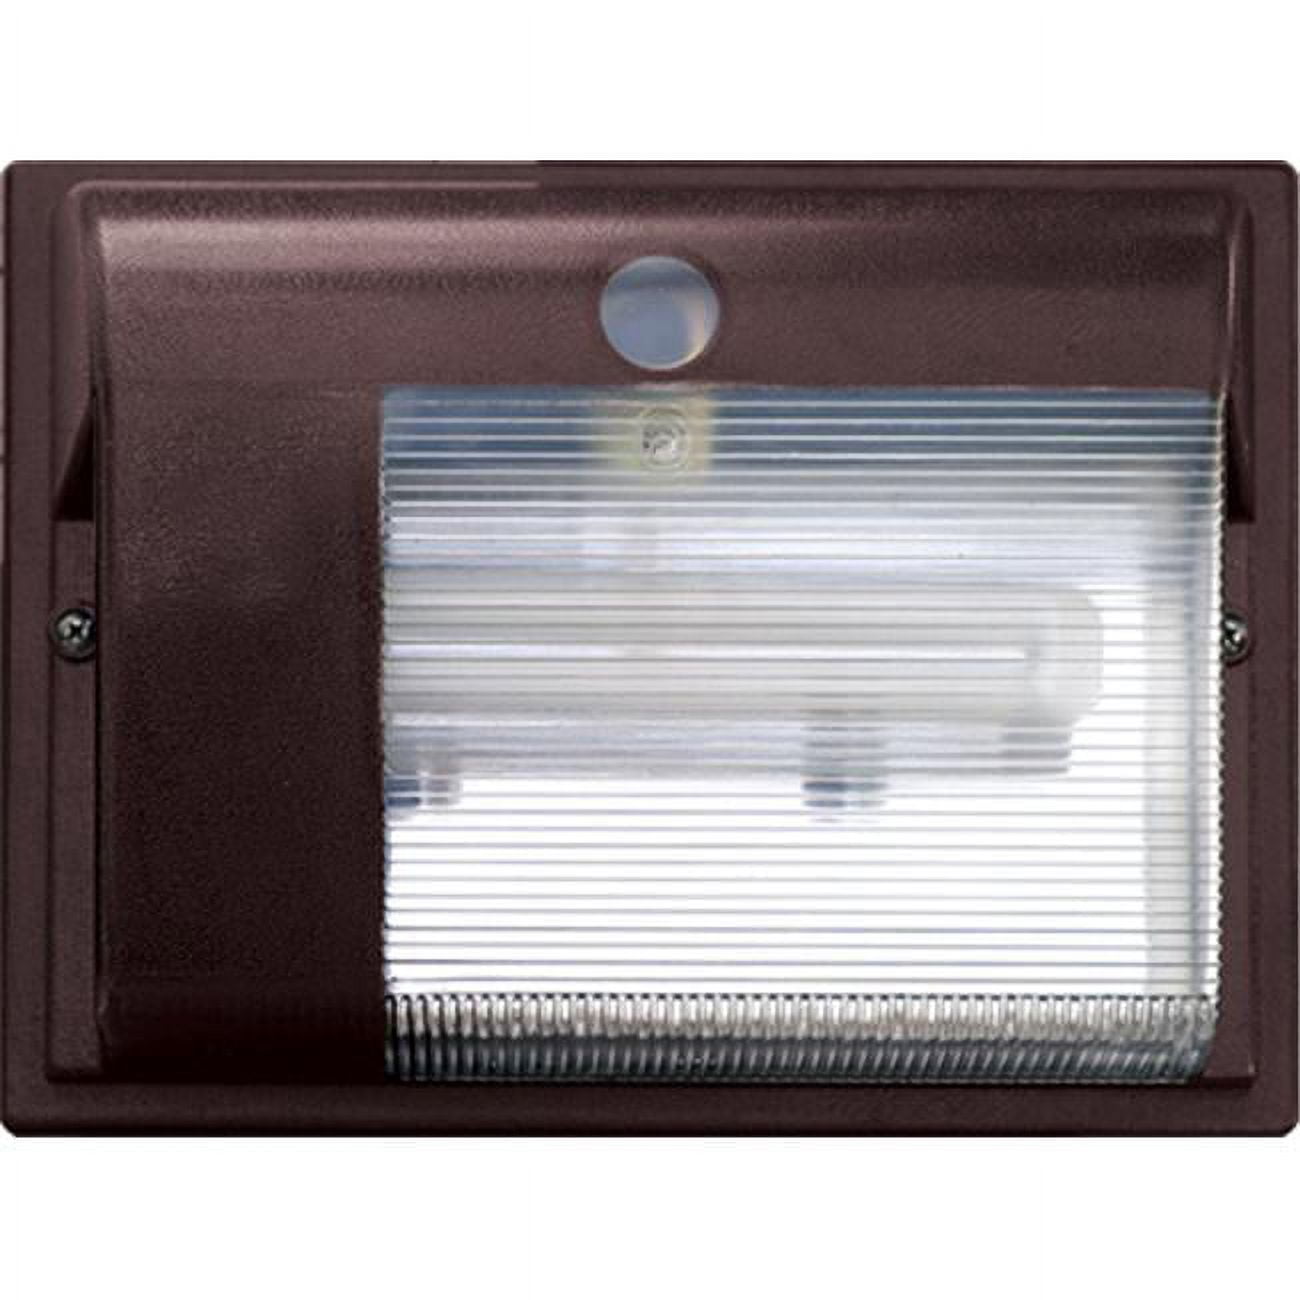 Picture of Dabmar Lighting DF6413-BZ 7.50 x 10 x 3.17 in. 120 V 13 watts Polycarbonate Surface Mounted Wall Fixture Light with PL13 Fluorescent Lamp, Bronze